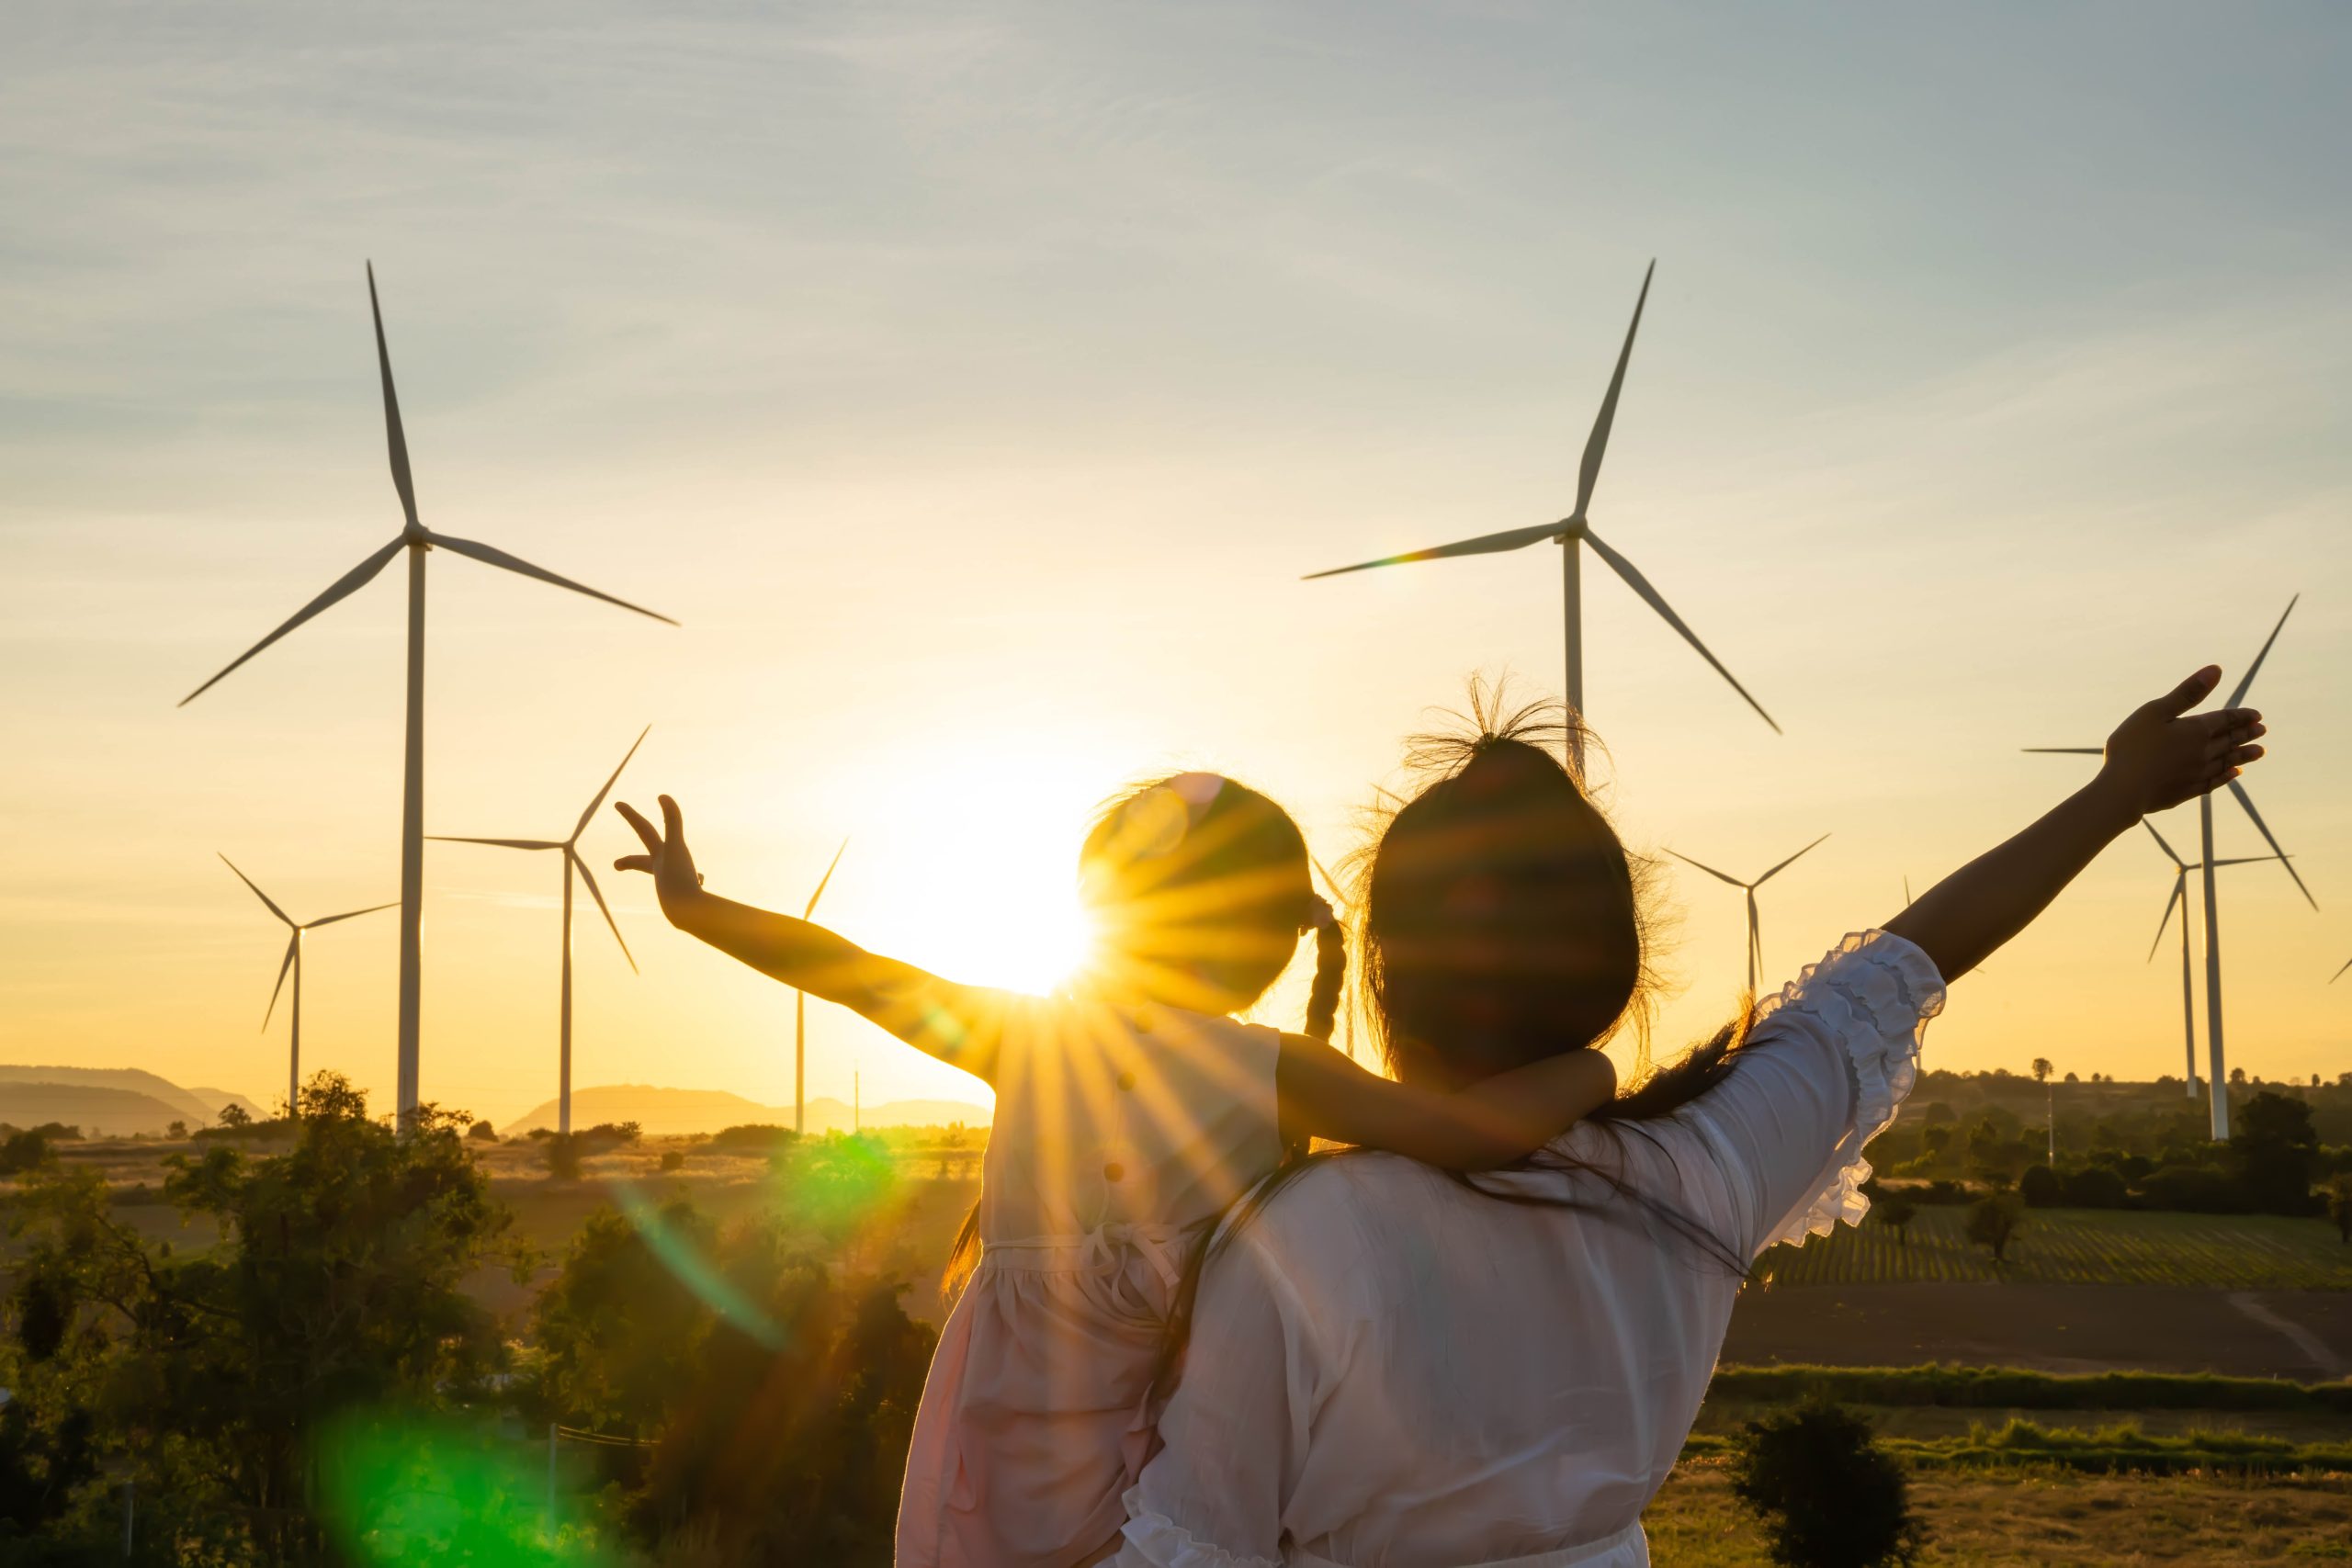 An adult holding a child, with their arms outstretched, both facing wind turbines in the setting sun.